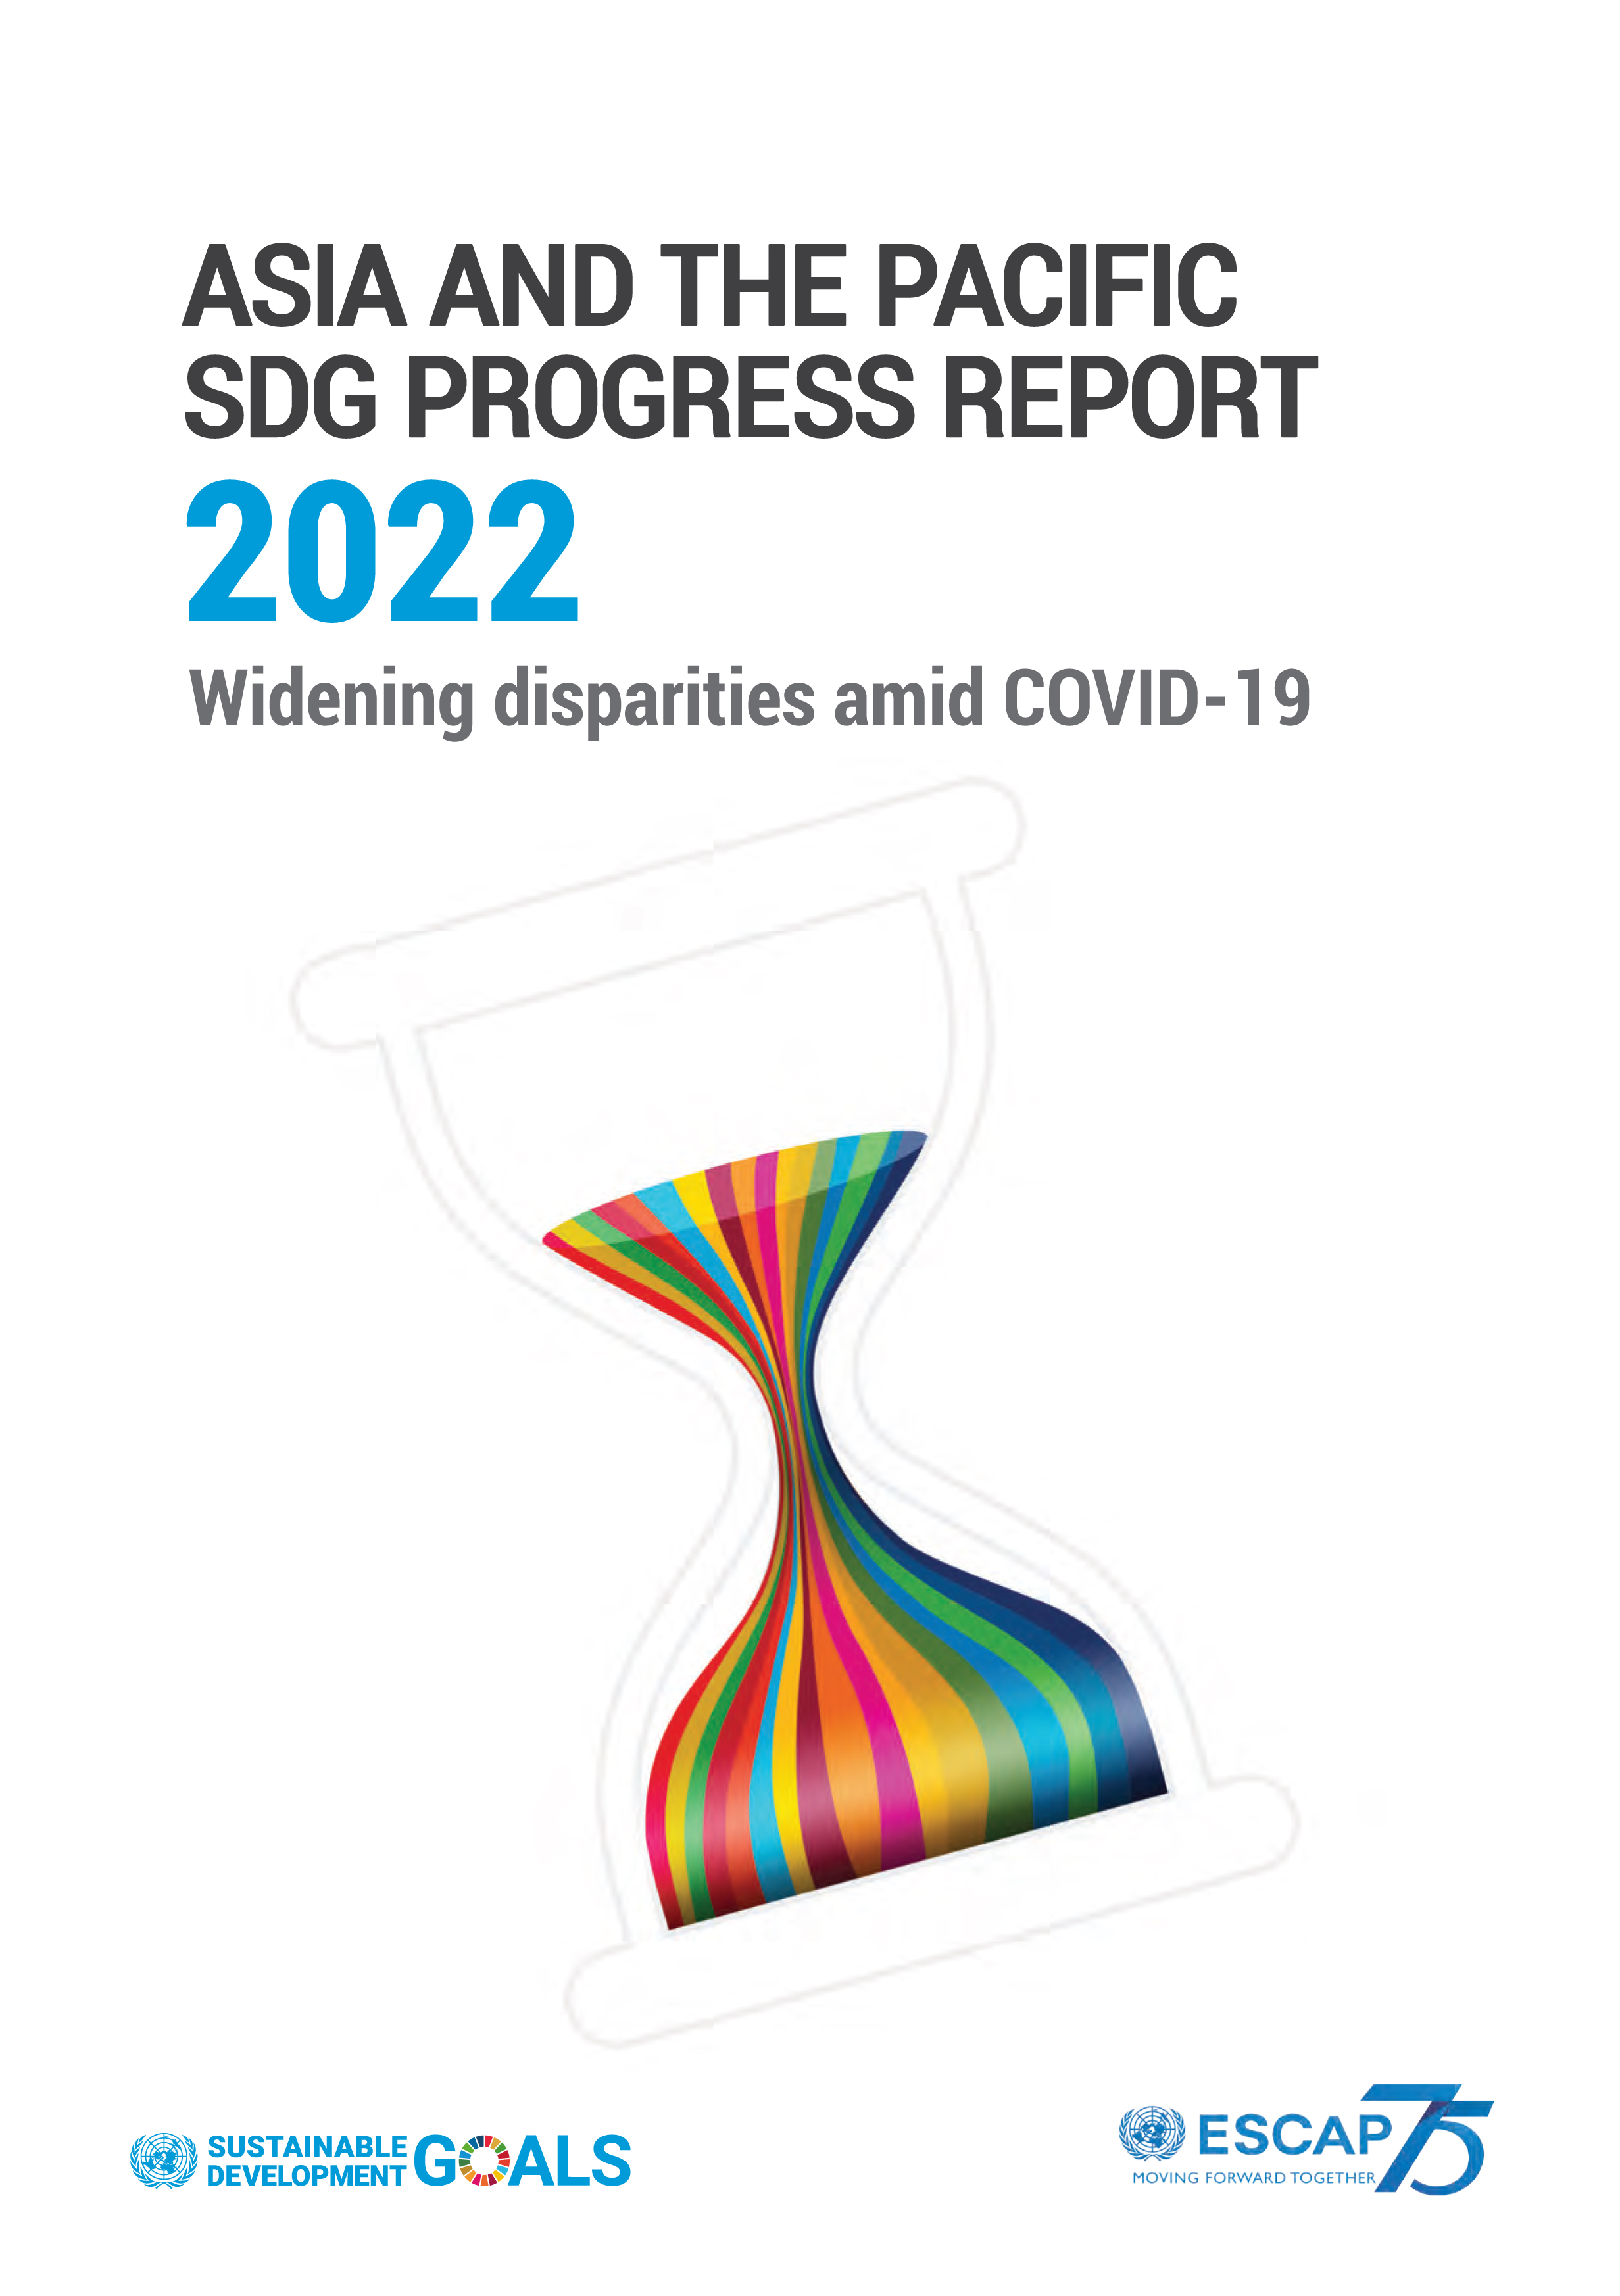 image of Asia and the Pacific SDG Progress Report 2022